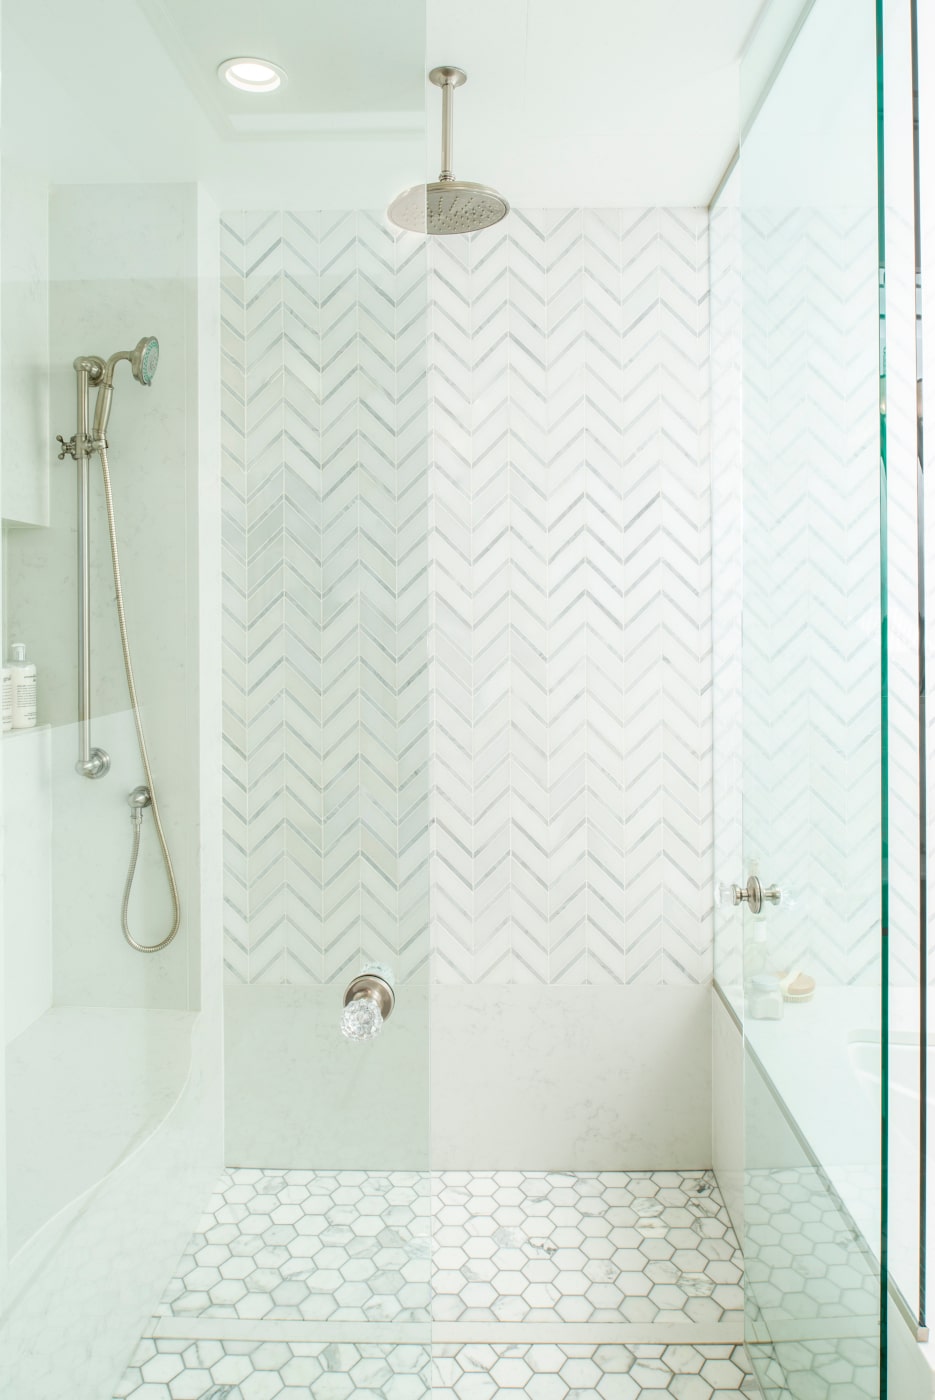 The shower's marble hex-tile floor and herringbone wall are elegant and timeless.